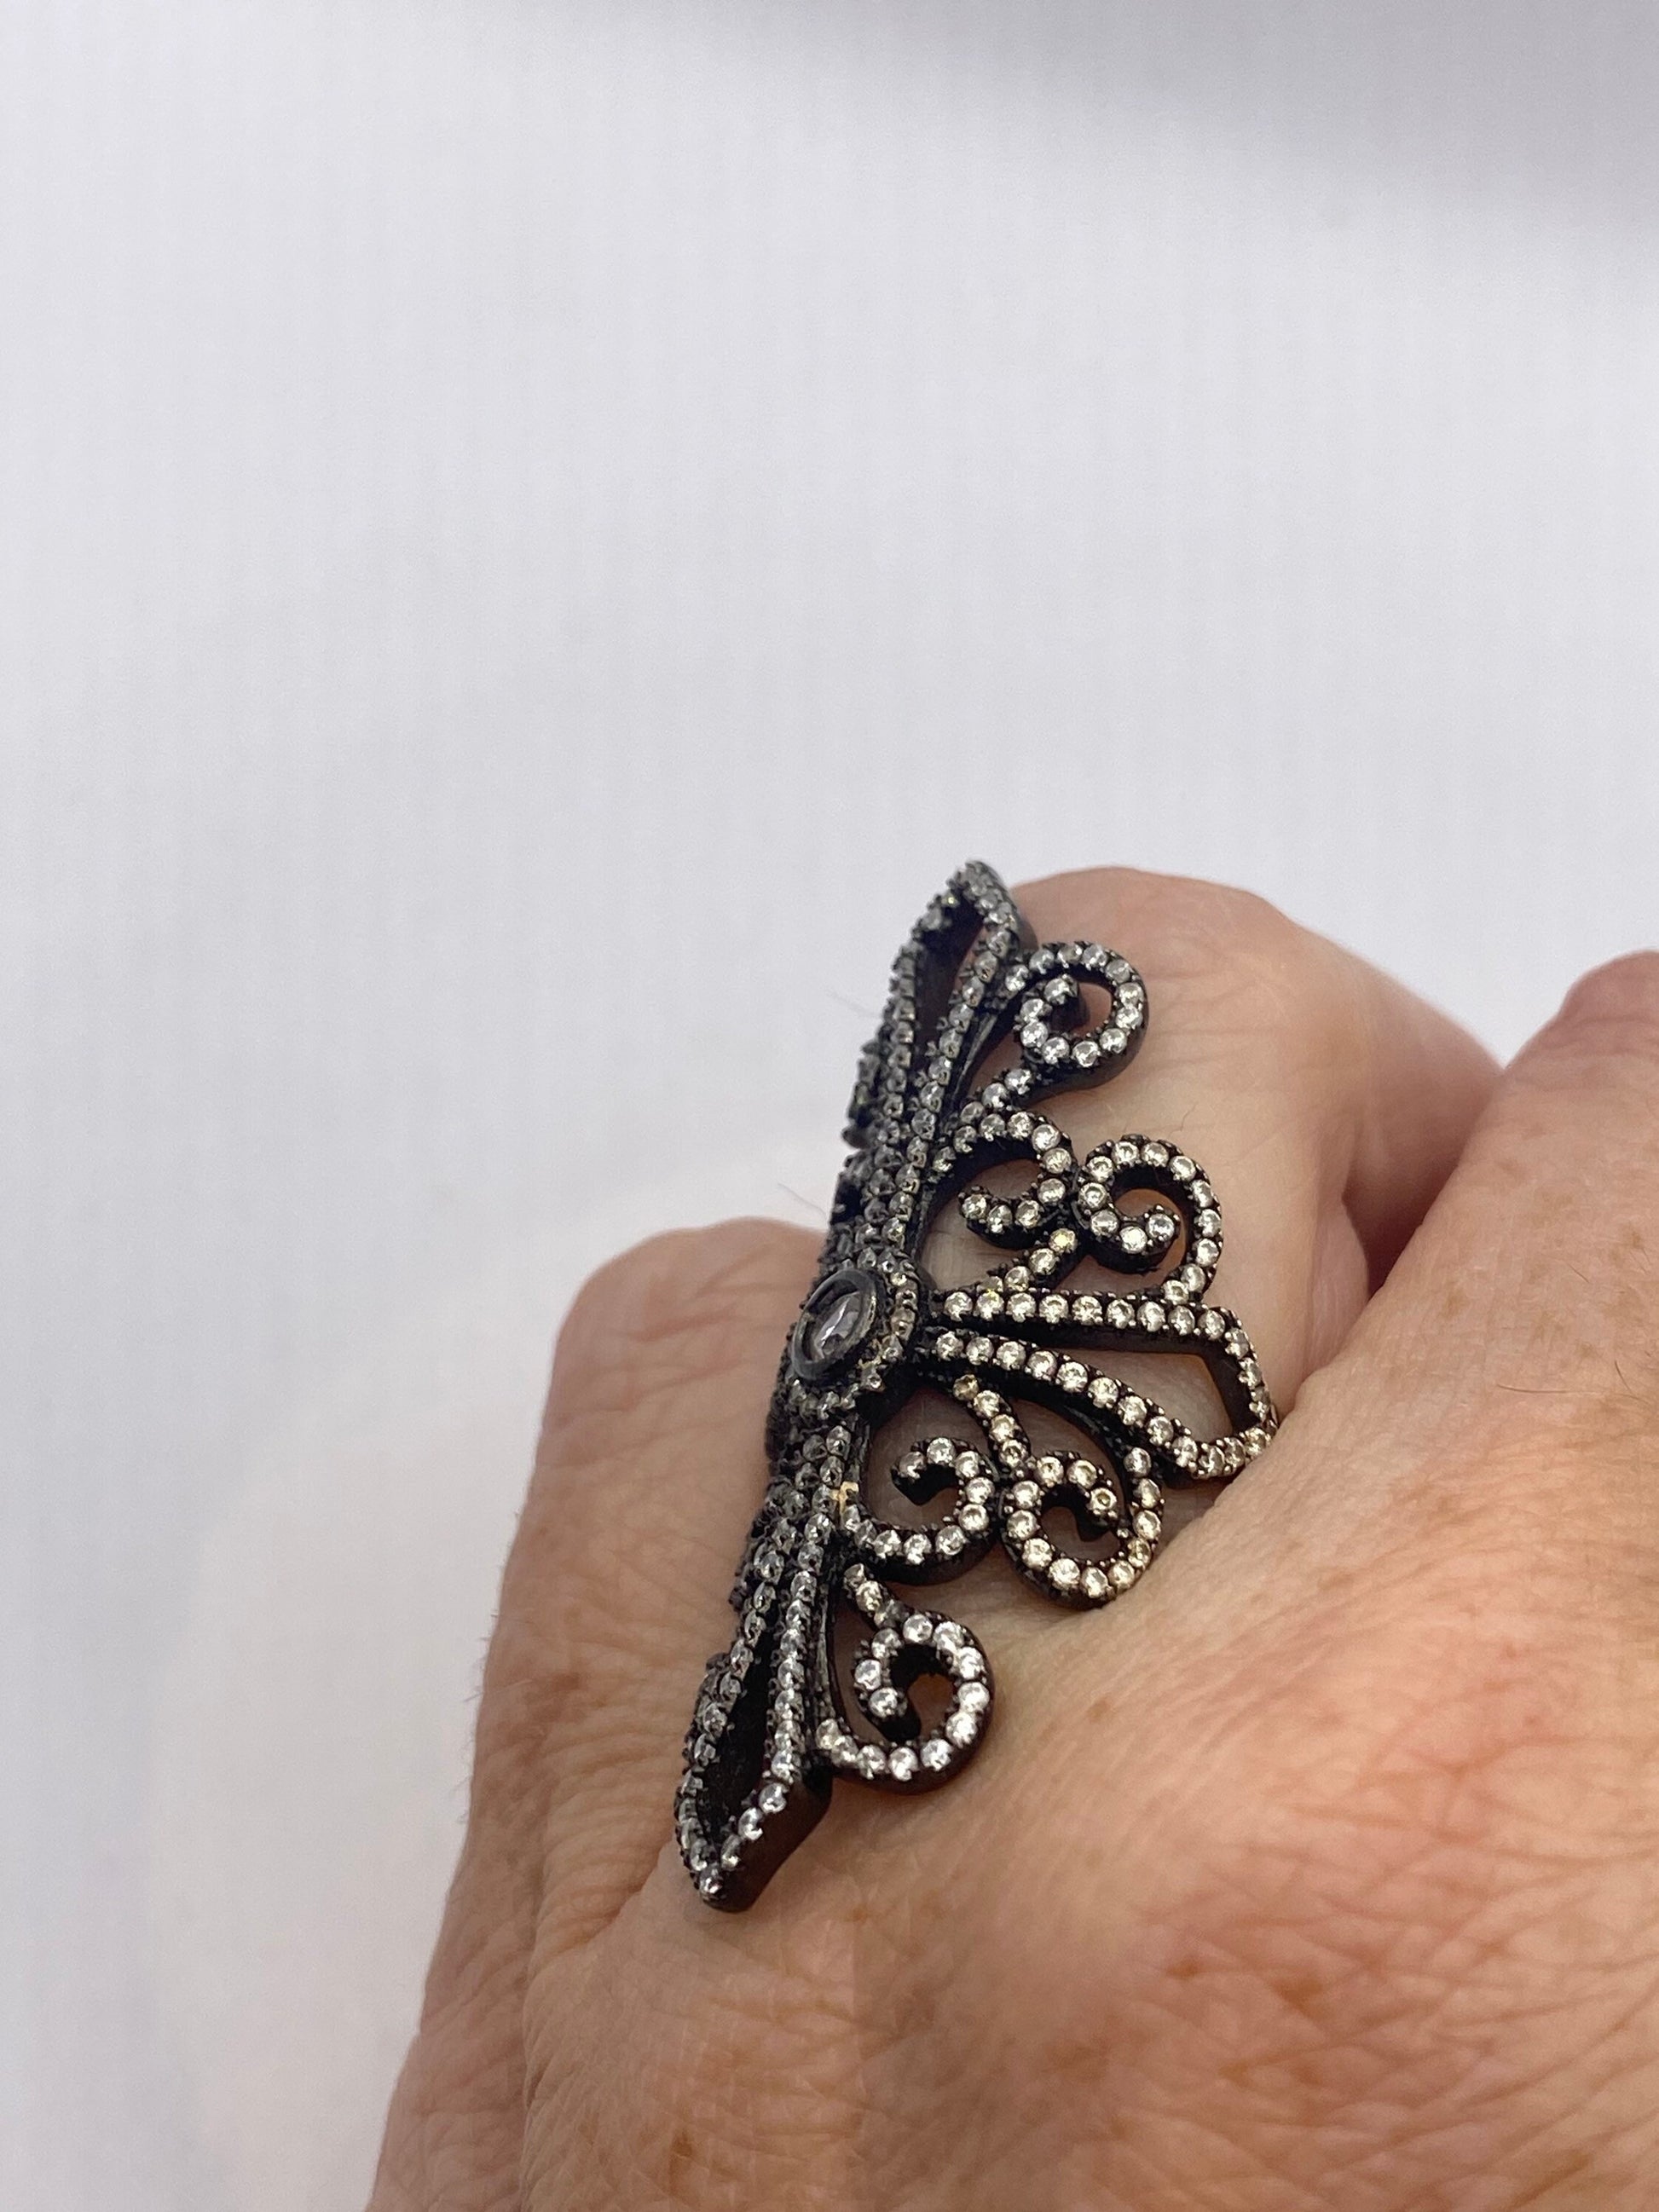 Vintage Filigree Cubic Zirconia Crystal Gothic Sterling Silver Ring